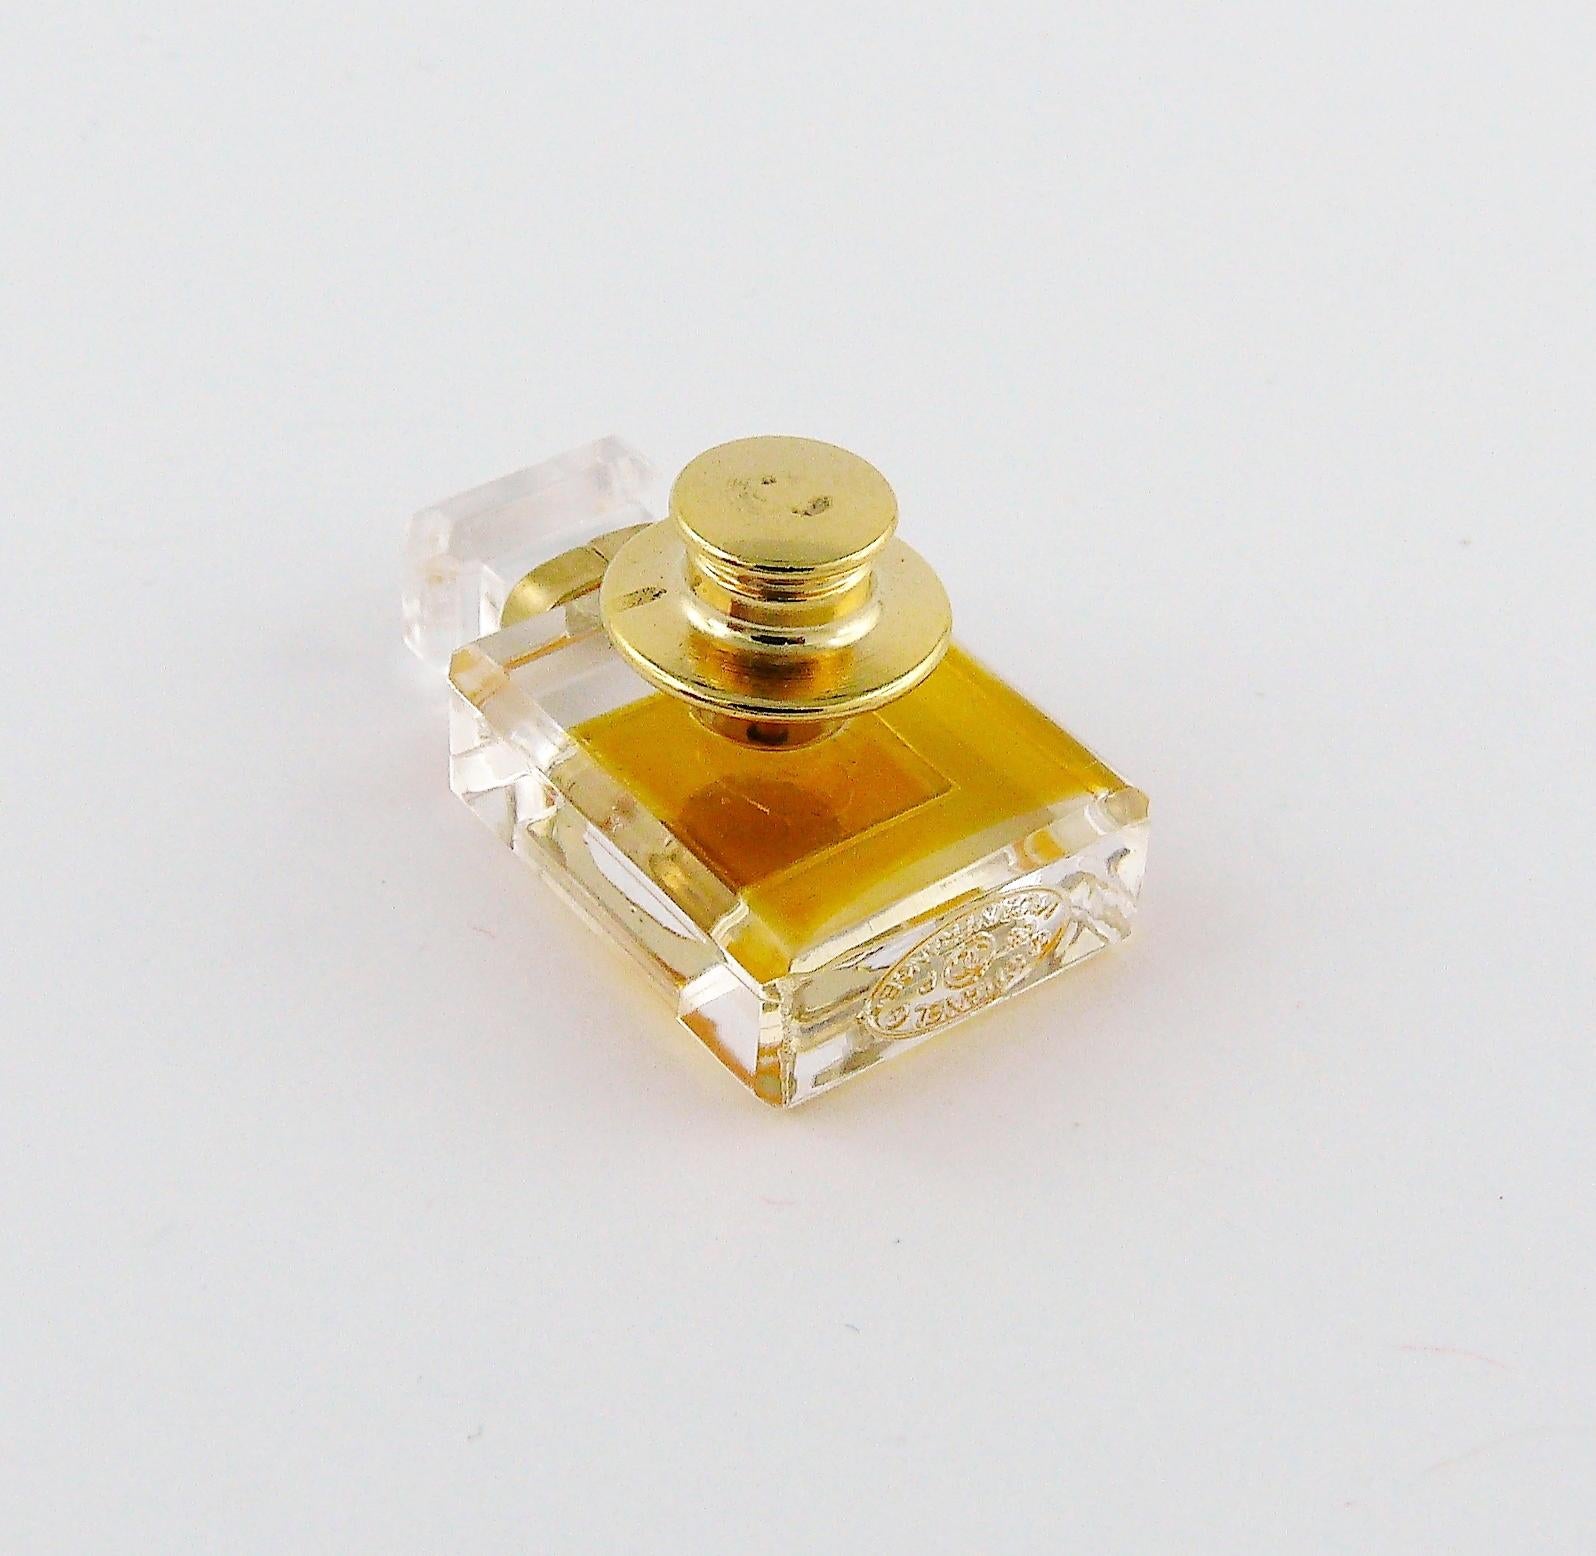 Chanel Iconic No. 5 Perfume Bottle Pin Brooch 2